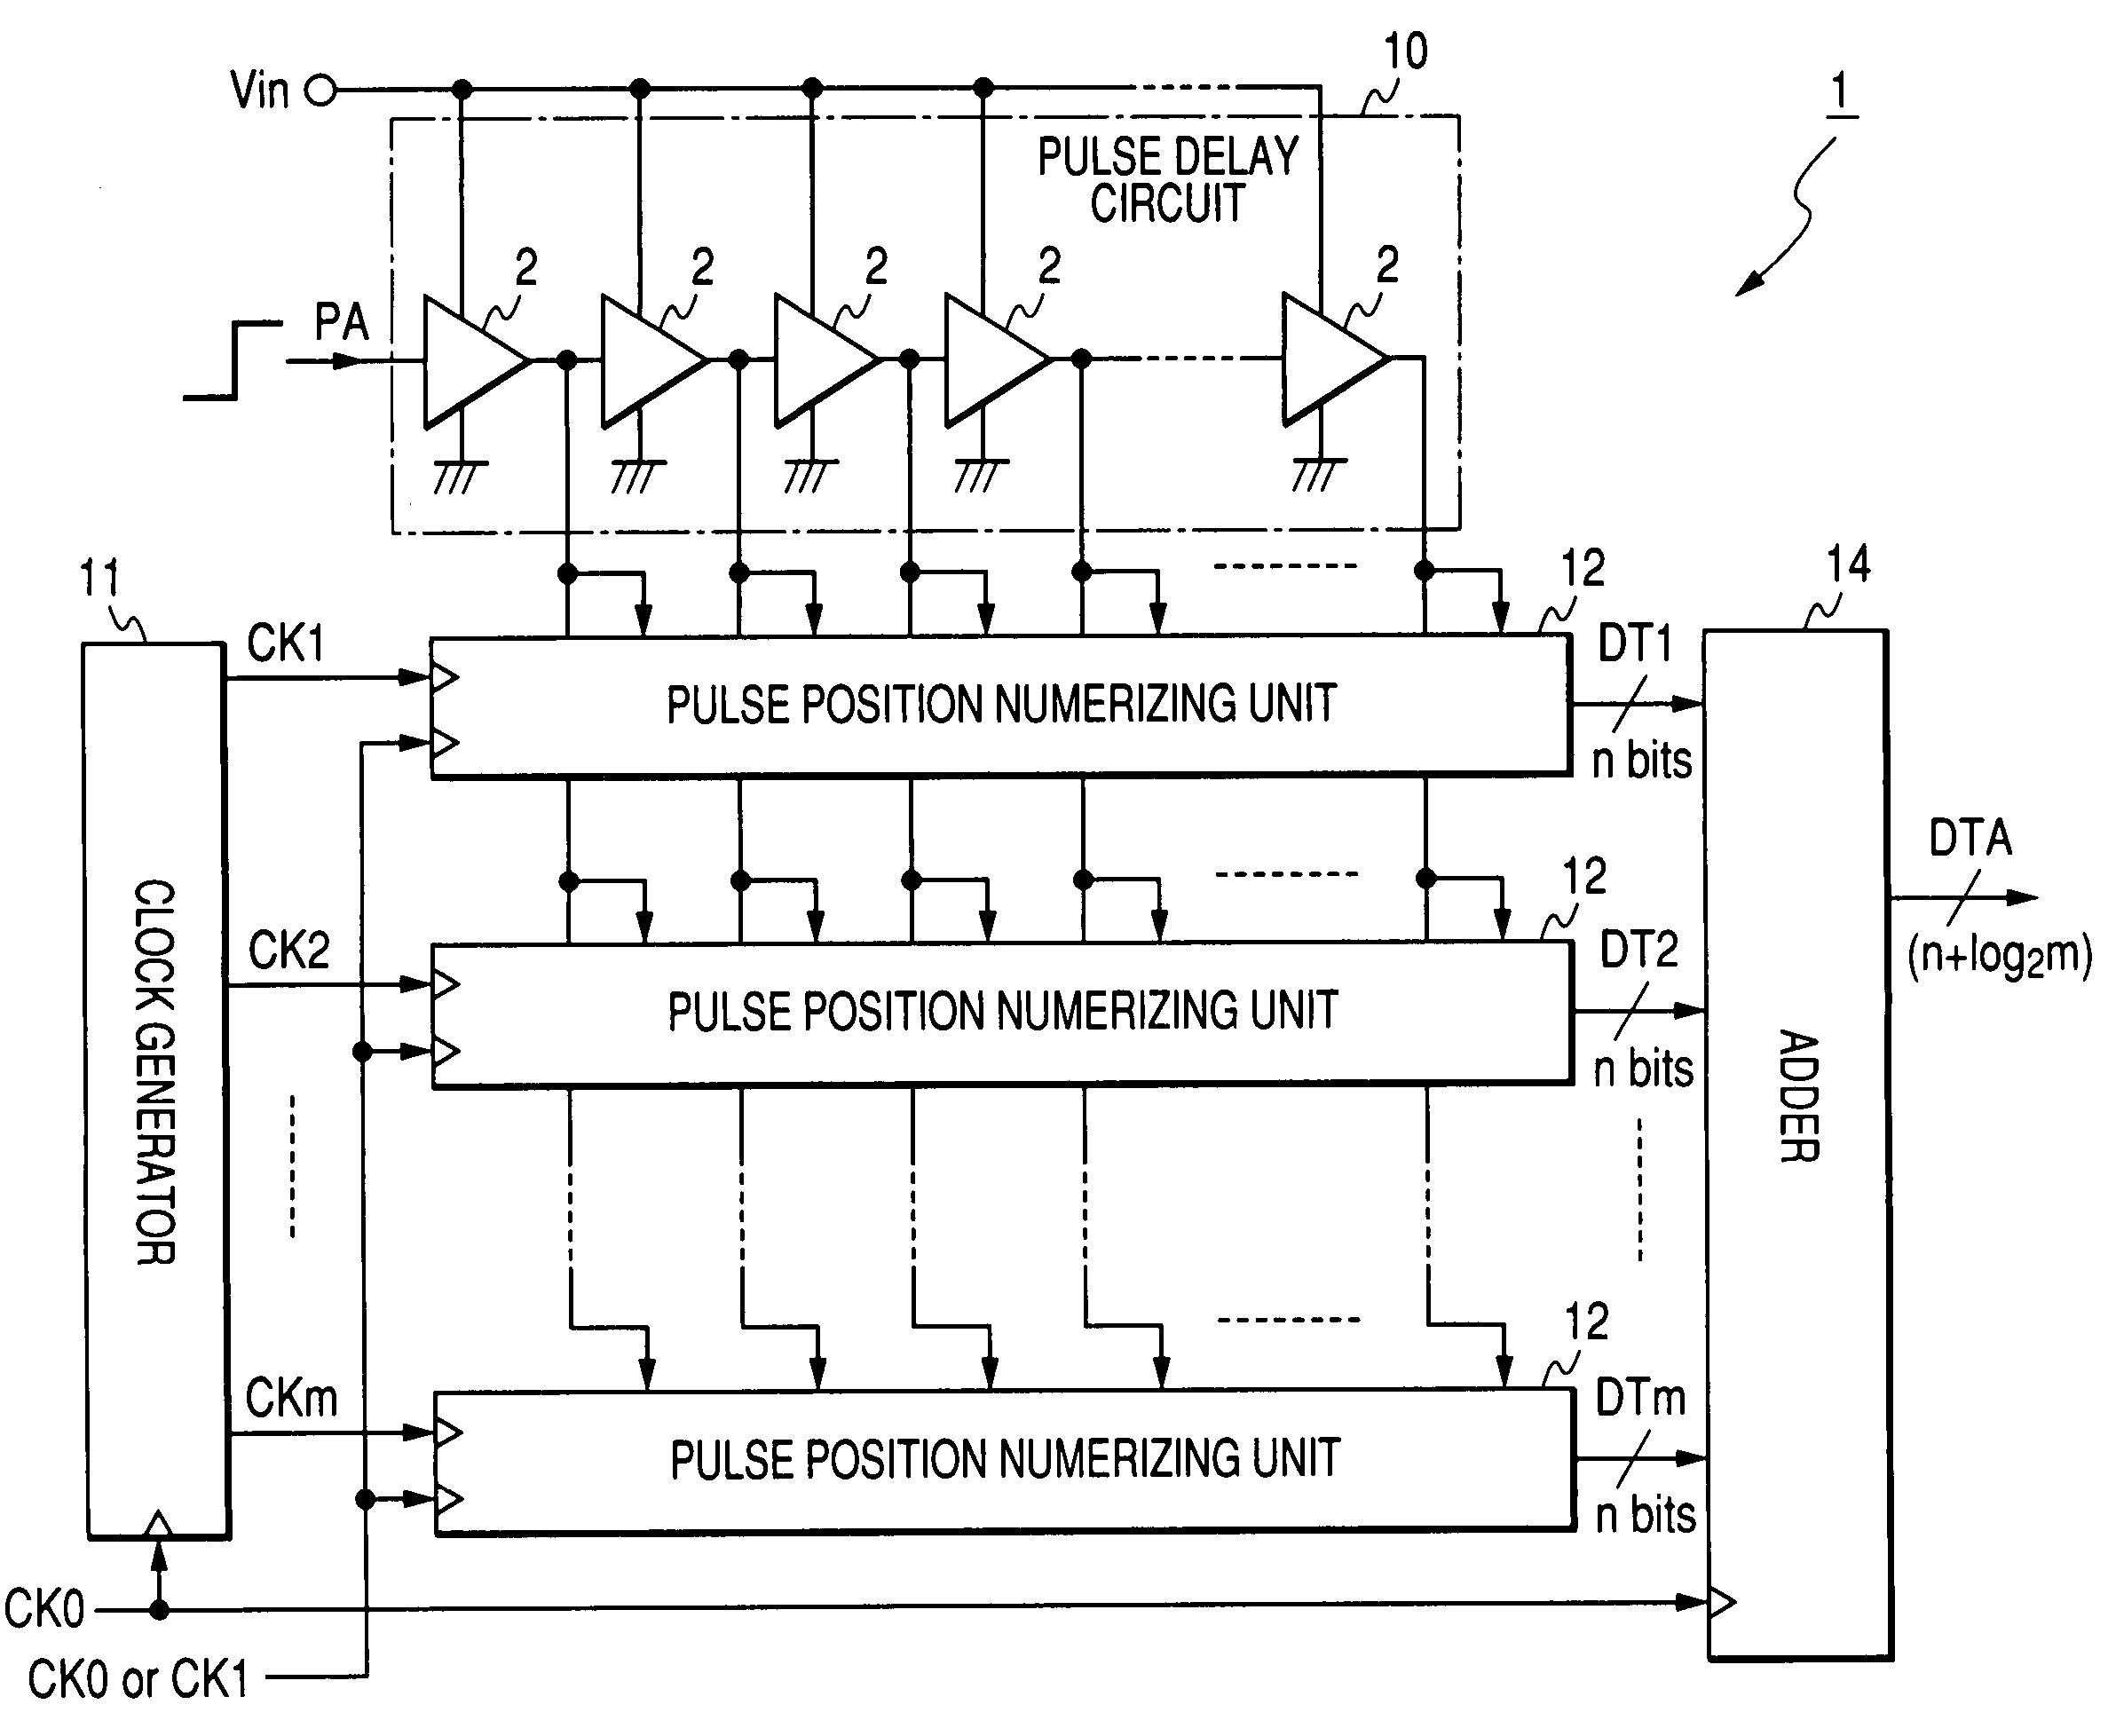 Analogue to digital conversion device operable on different sampling clocks